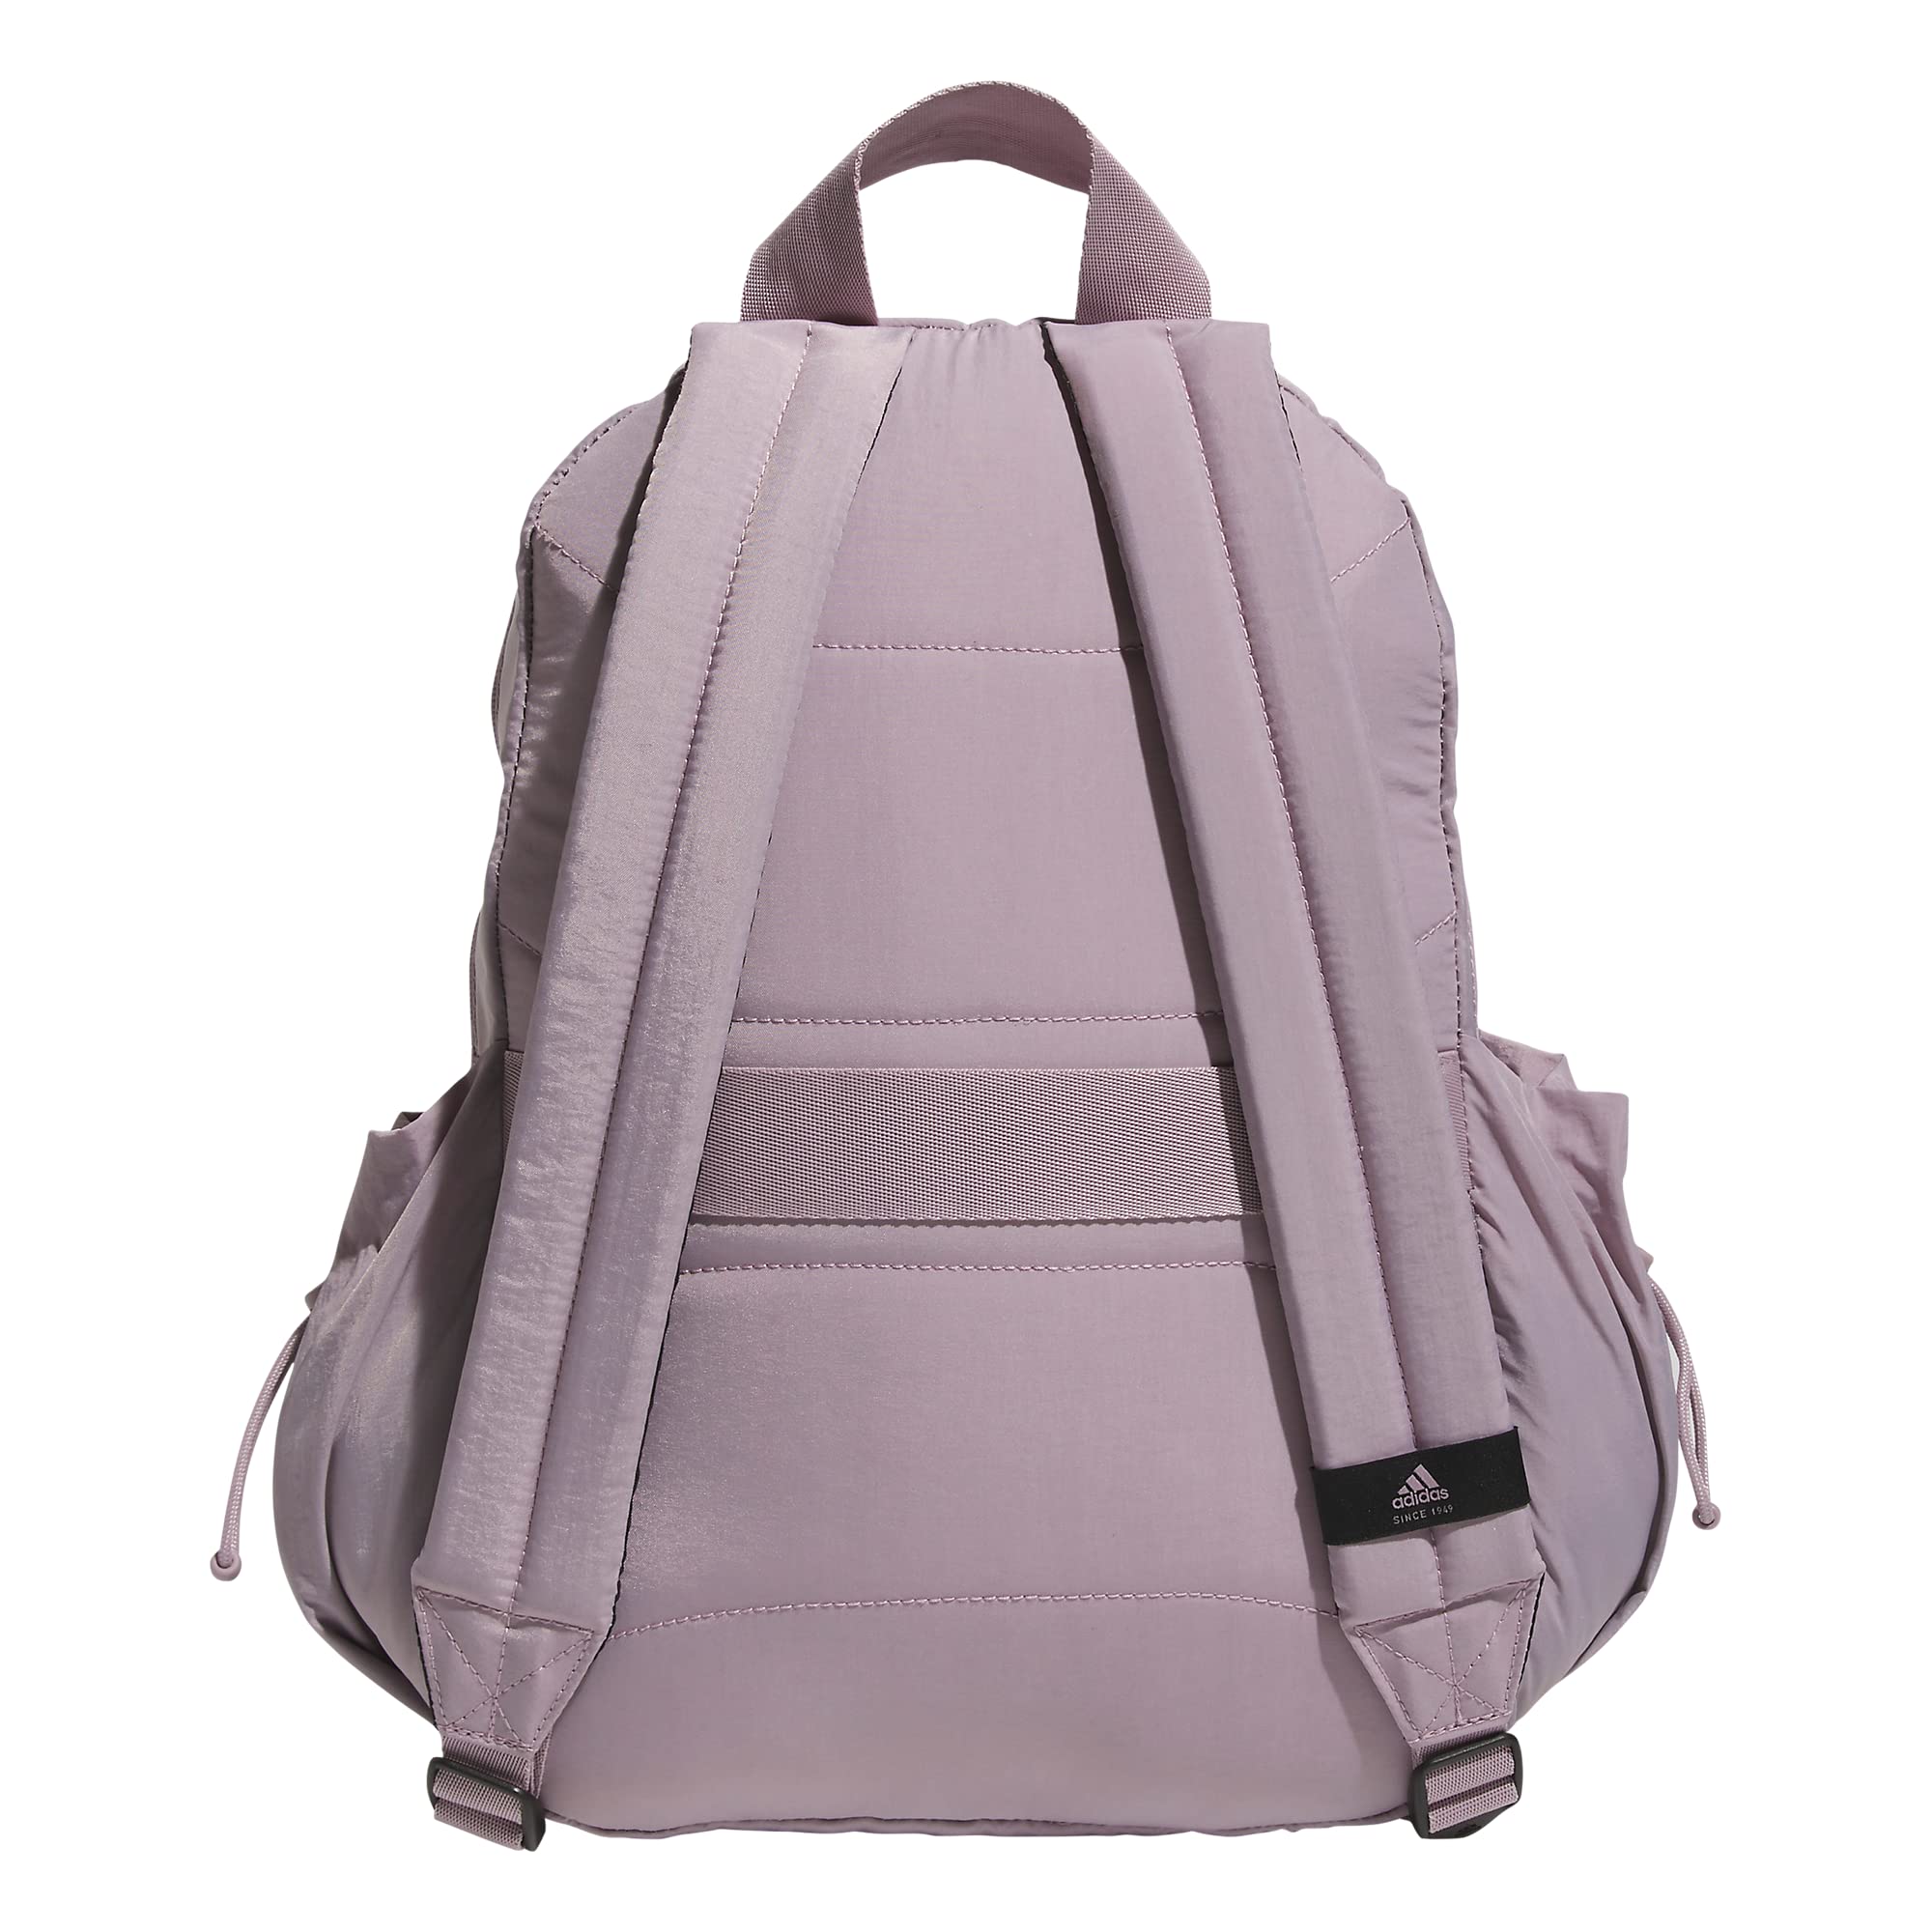 adidas Weekender Sport Fashion Compact Smaller Backpack with Detachable Mini valuables Pouch, Preloved Fig Purple, One Size